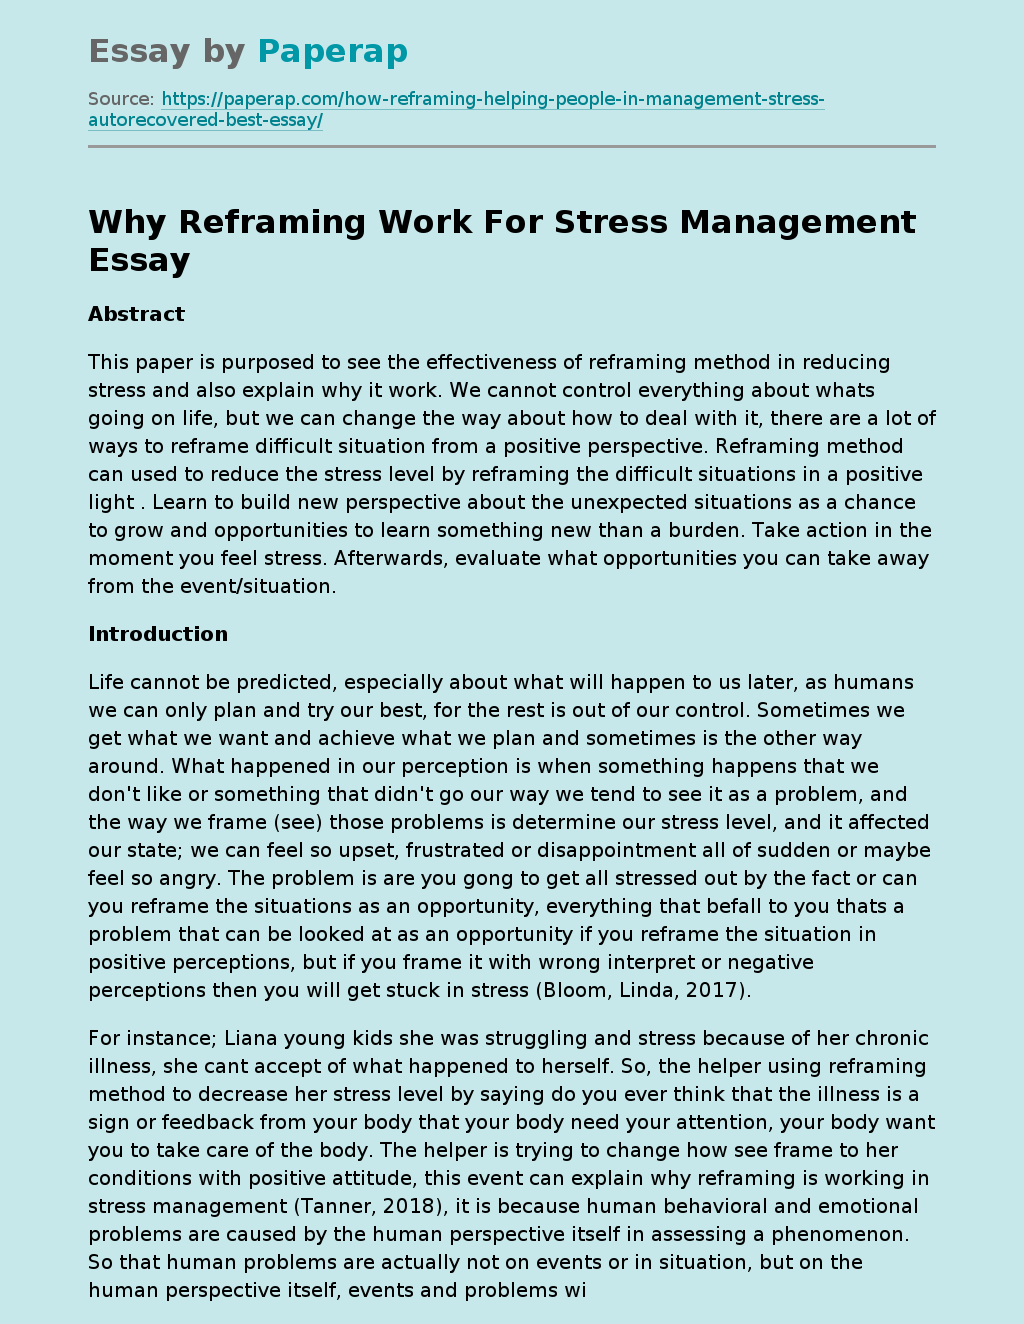 Why Reframing Work For Stress Management